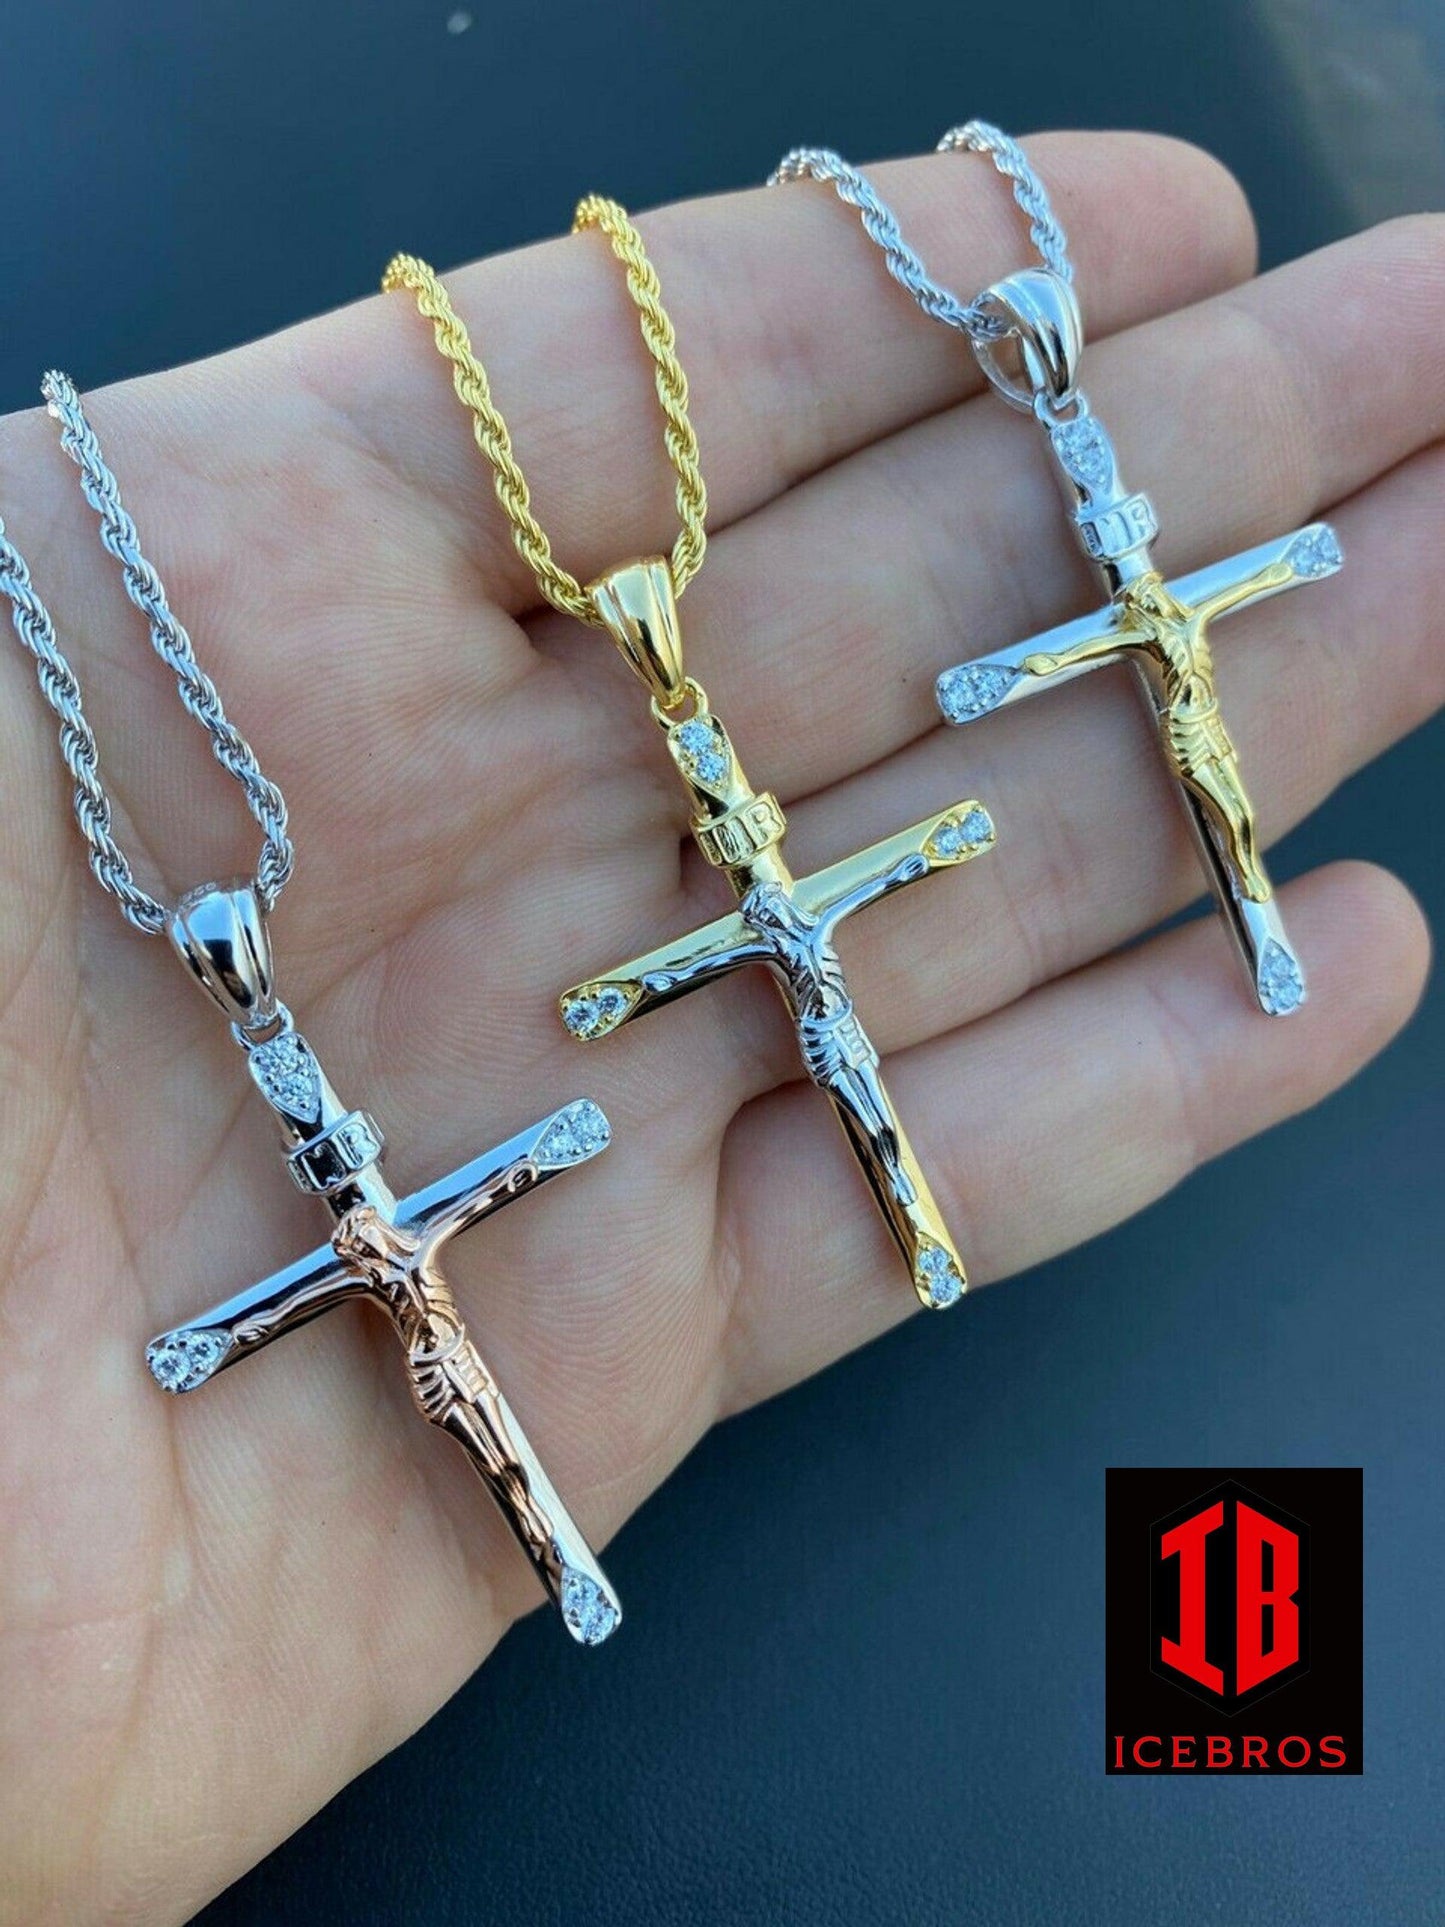 Vermeil Solid 925 Silver Cross + Jesus Pendant Yellow Or Rose Gold Finish Necklace